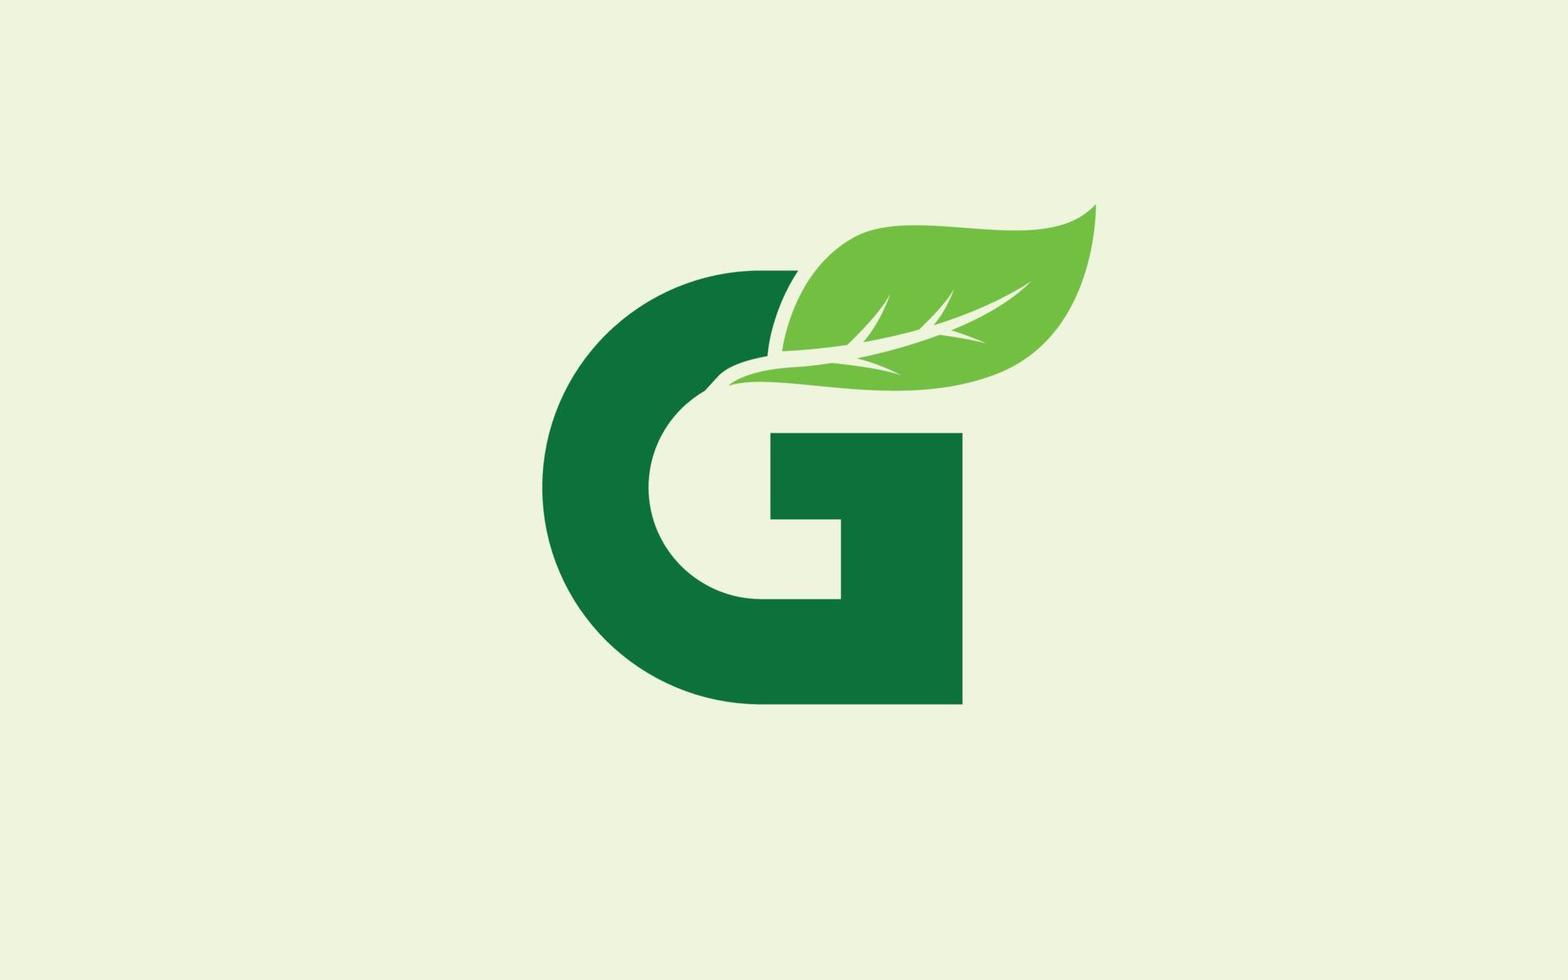 G logo leaf for identity. nature template vector illustration for your brand.